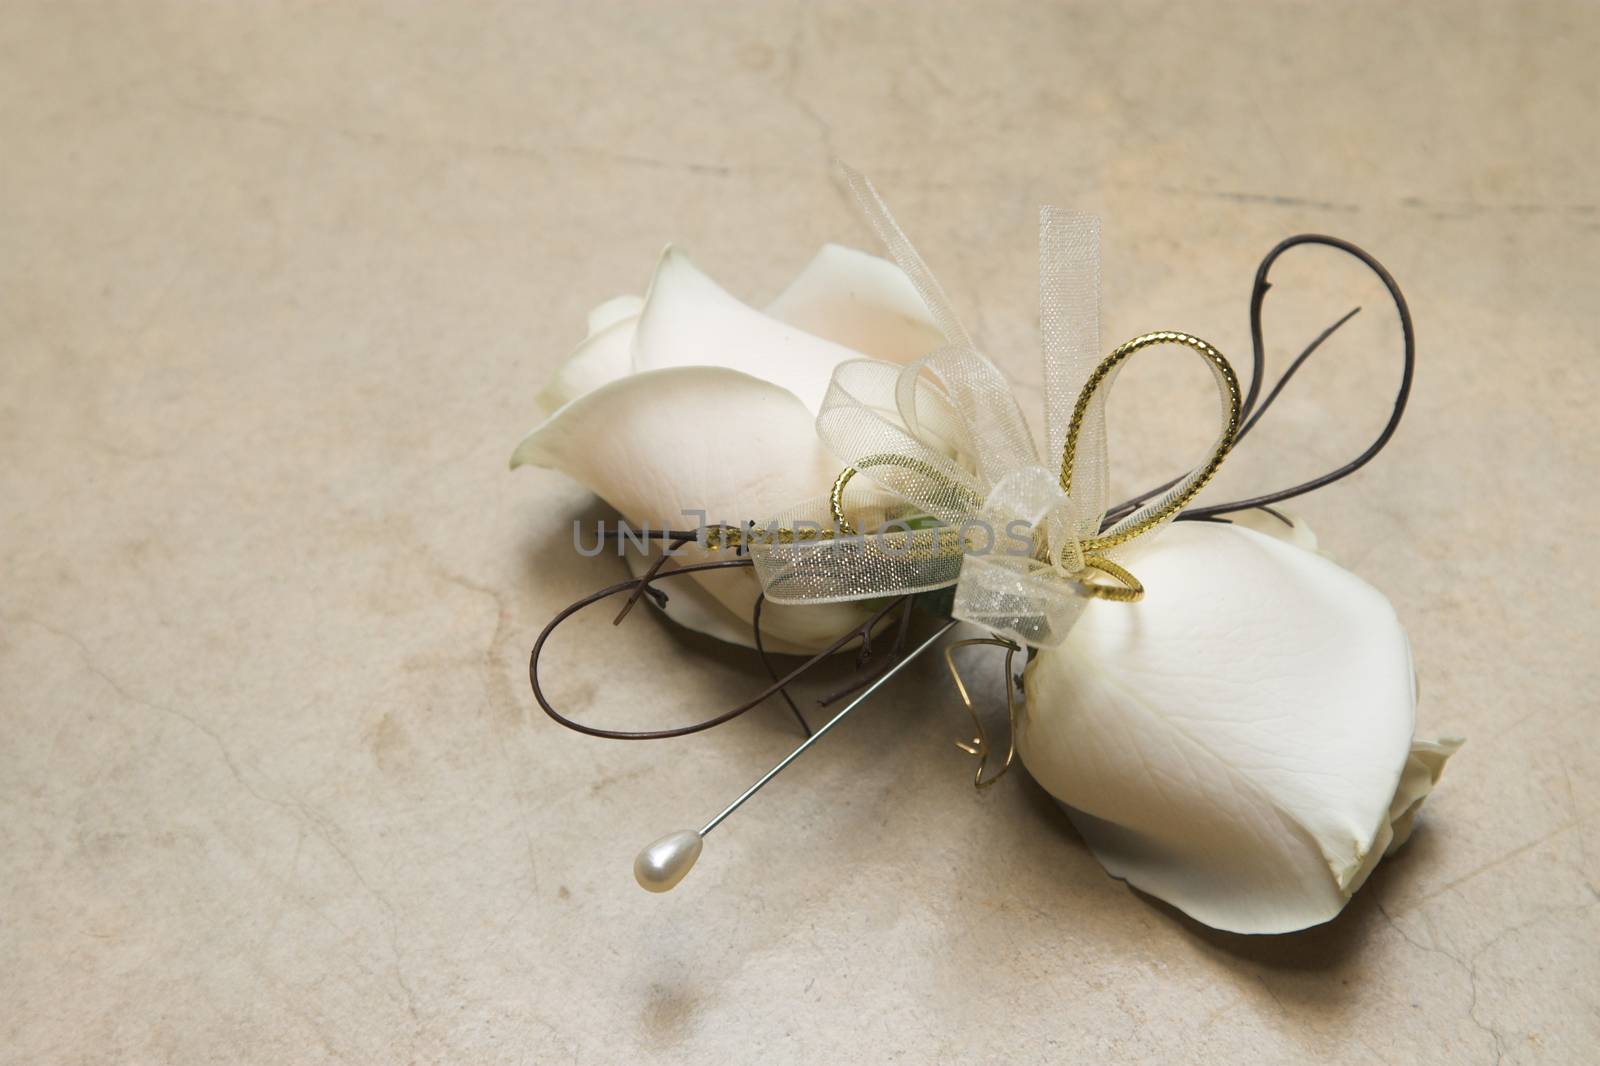 Cream and Gold rose wedding corsage with pin